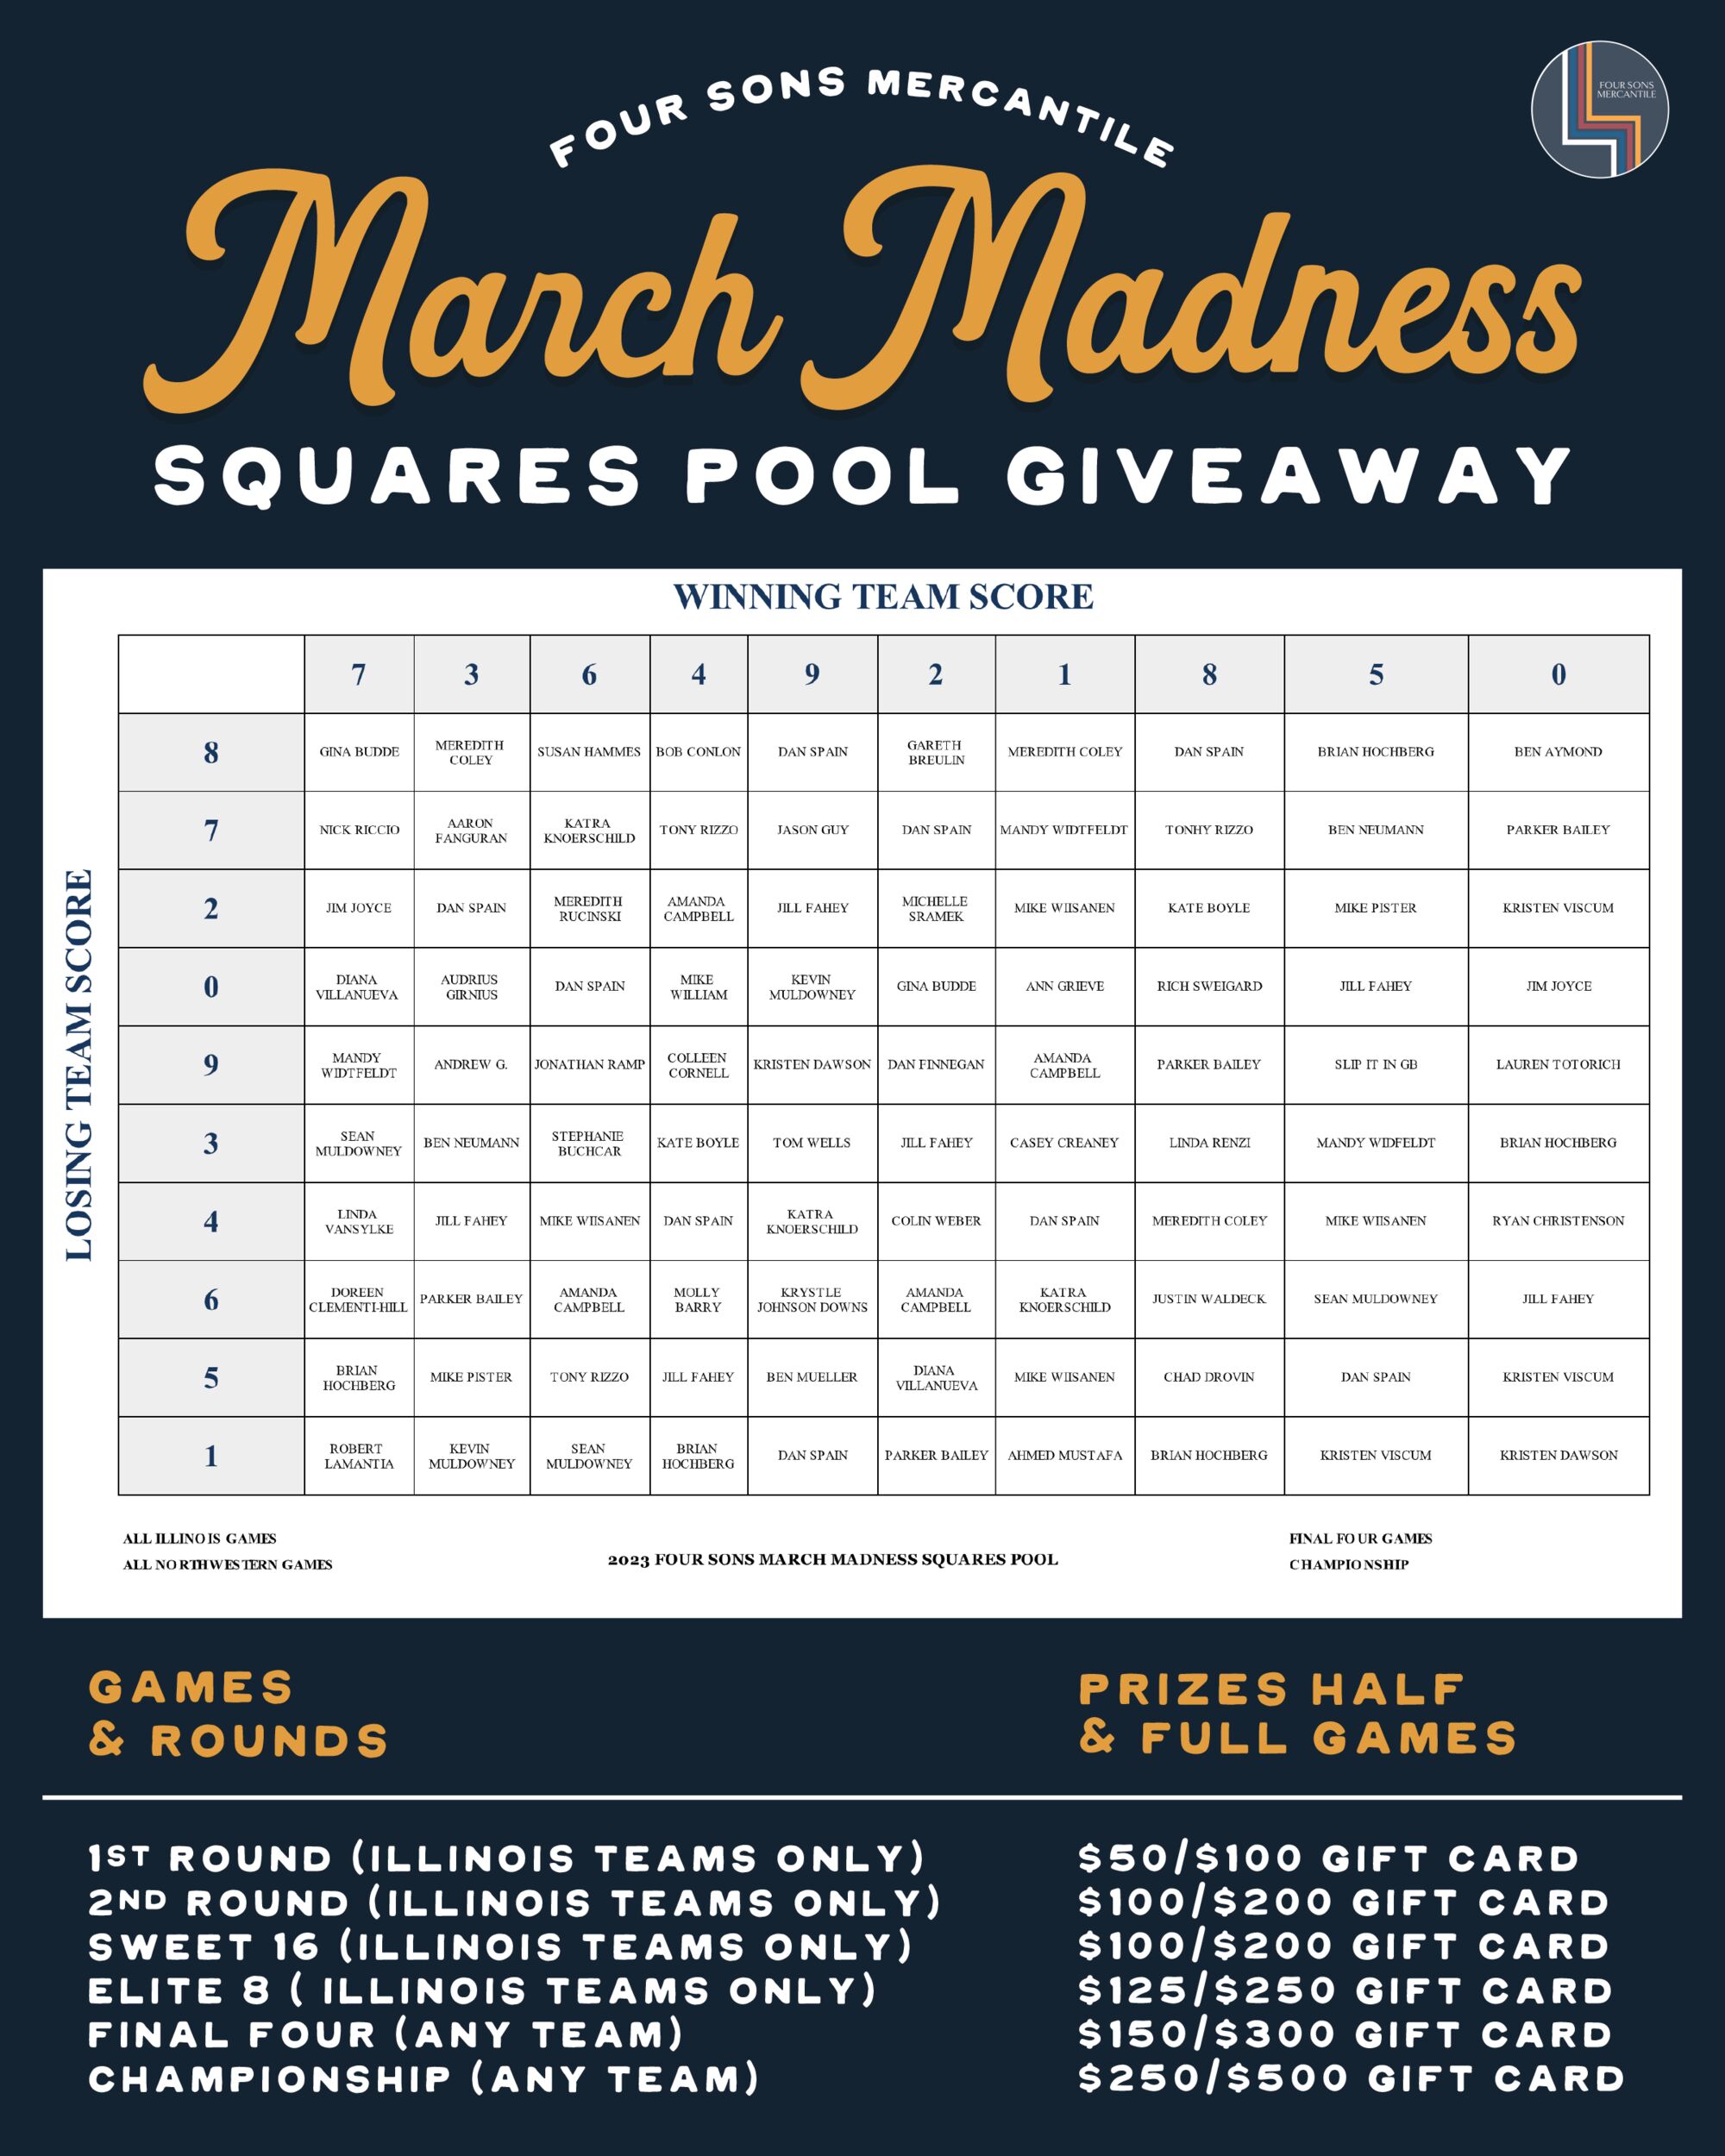 4 SQUARES POOL GIVEAWAY WINNING TEAM SCORE o Q @R O n o ATR. KNOERSCHILD . ALLILLINOIS GAMES FINAL FO UR GAMES ALL NO RTHWES TERN GAMES 2023 FOUR SONS MARCH MADNESS SQUARES POOL CHAMPIONSHIP 1ST ROUND ILLINOIS TEAMS ONLY $50$100 GIFT CARD 2ND ROUND ILLINOIS TEAMS ONLY $100$200 GIFT CARD SWEET 16 ILLINOIS TEAMS ONLY $100$200 GIFT CARD ELITE 8 ILLINOIS TEAMS ONLY $125$250 GIFT CARD FINAL FOUR ANY TEAM $150$300 GIFT CARD CHAMPIONSHIP ANY TEAM $250$500 GIFT CARD 